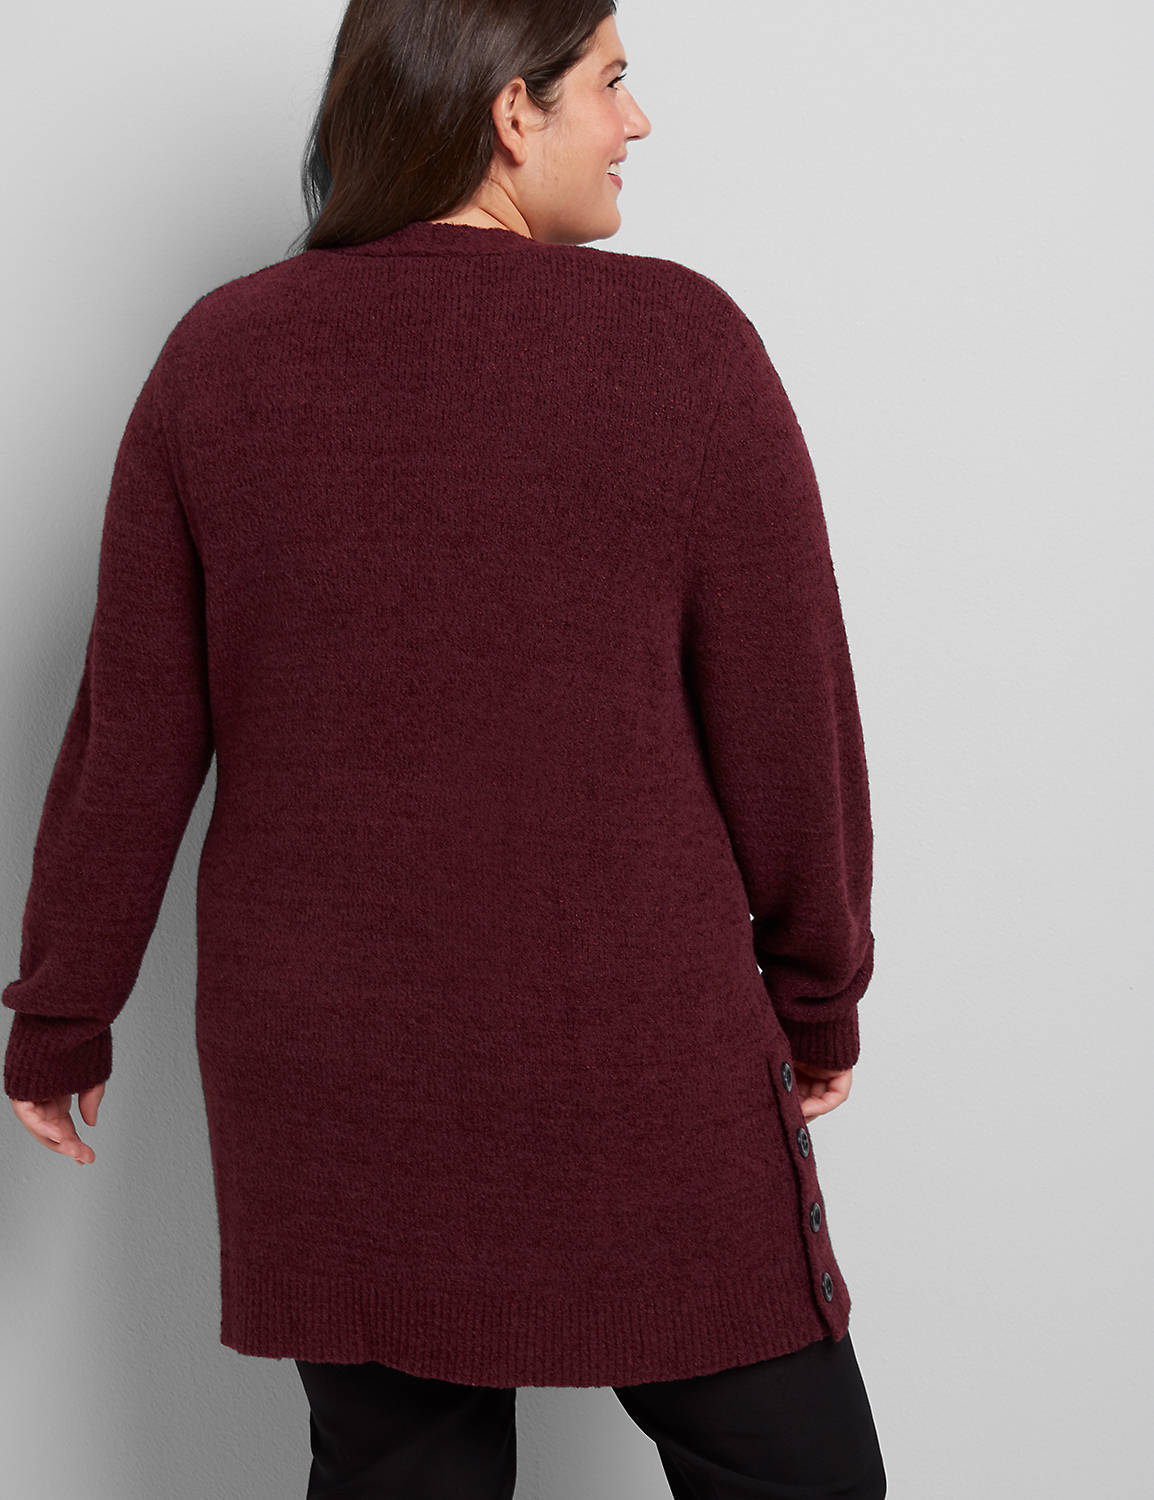 Long Sleeve Open Front Side Button Vent Cardigan :PANTONE Winetasting:10/12 Product Image 2